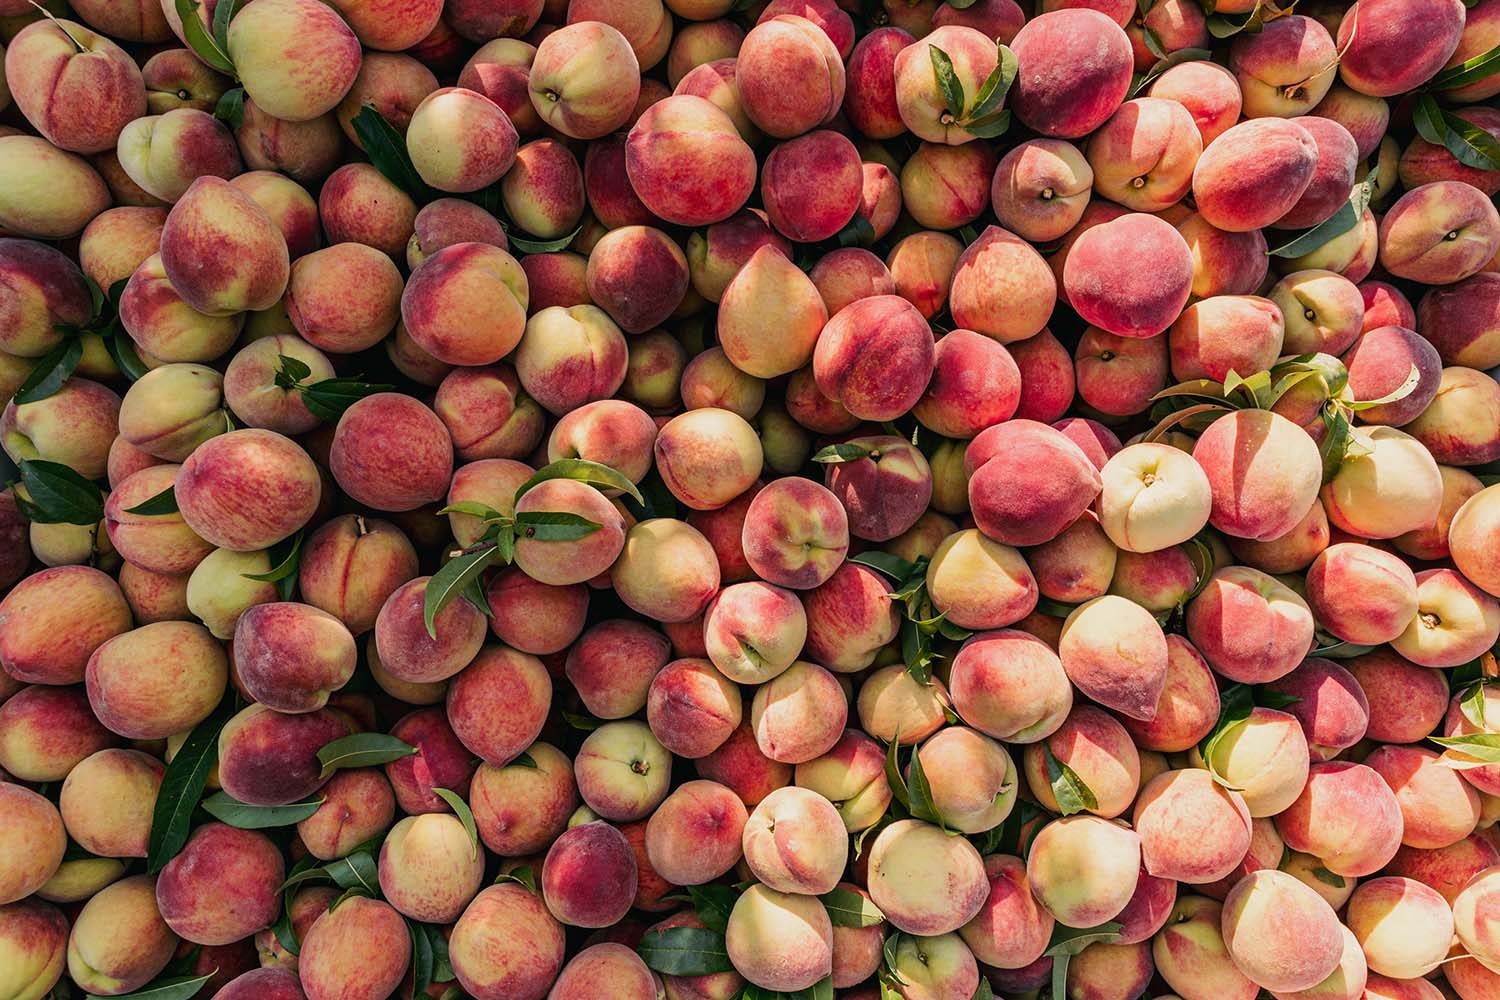 How to Ripen, Pick, and Store Peaches